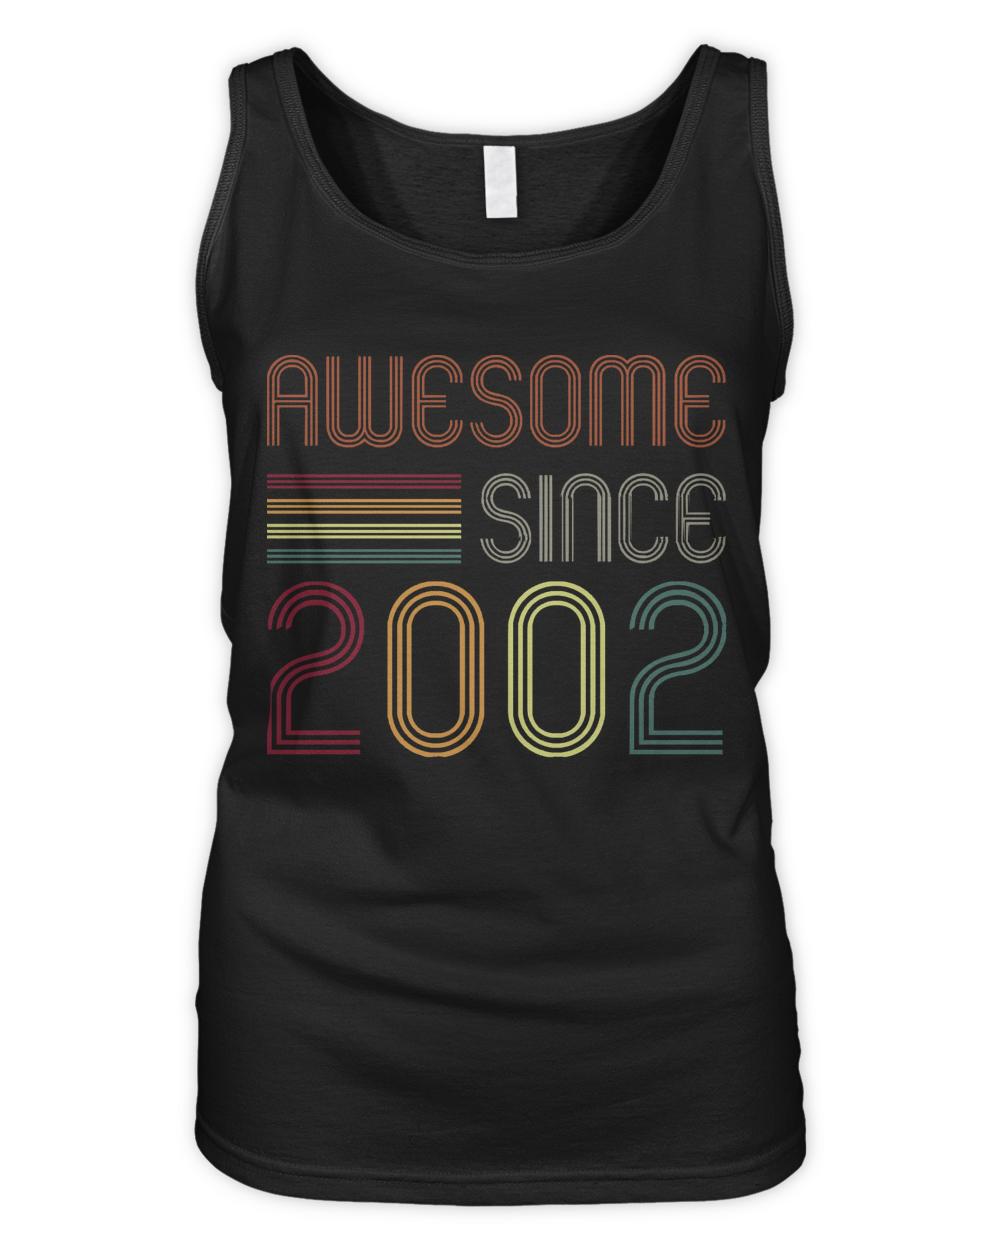 Awesome Since 2002 T-ShirtAwesome Since 2002 21st Birthday Retro T-Shirt